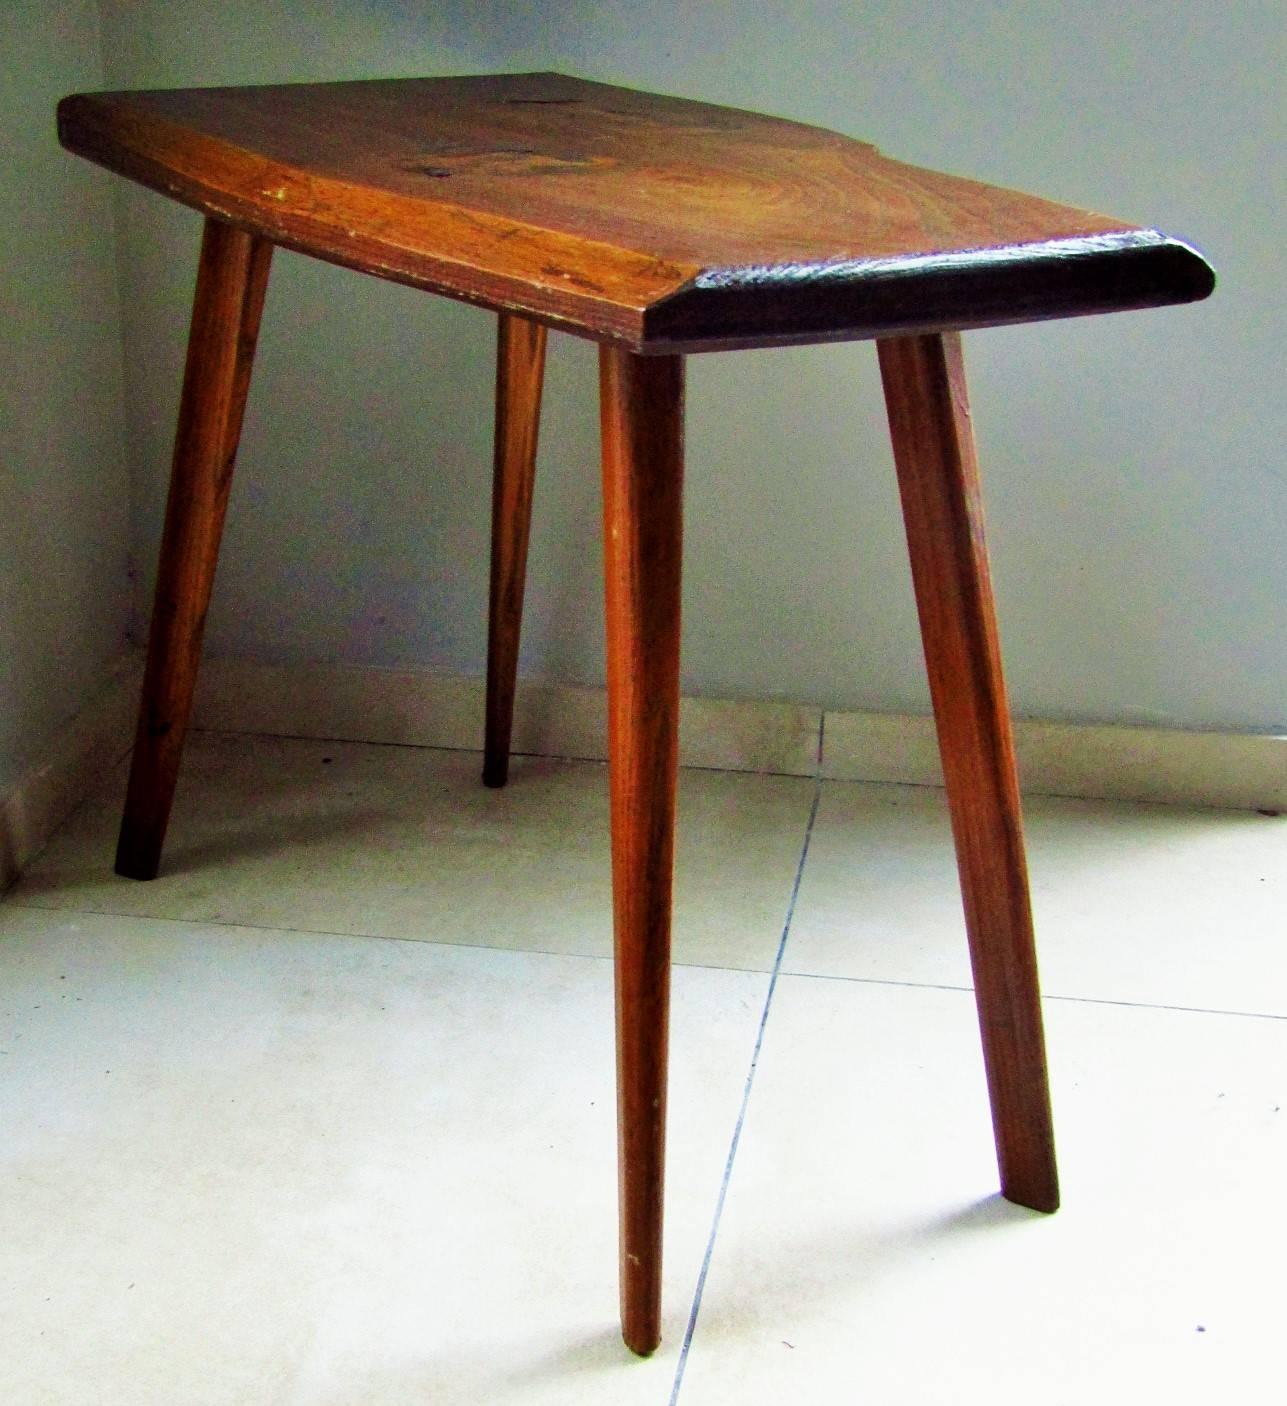 Side table France 1960 style Charlotte Perriand. Good original condition, only slightly French handpolished to preserve the original patina.

Note: Adds some nature look in your interior!

Worldewide free shipping for this item!